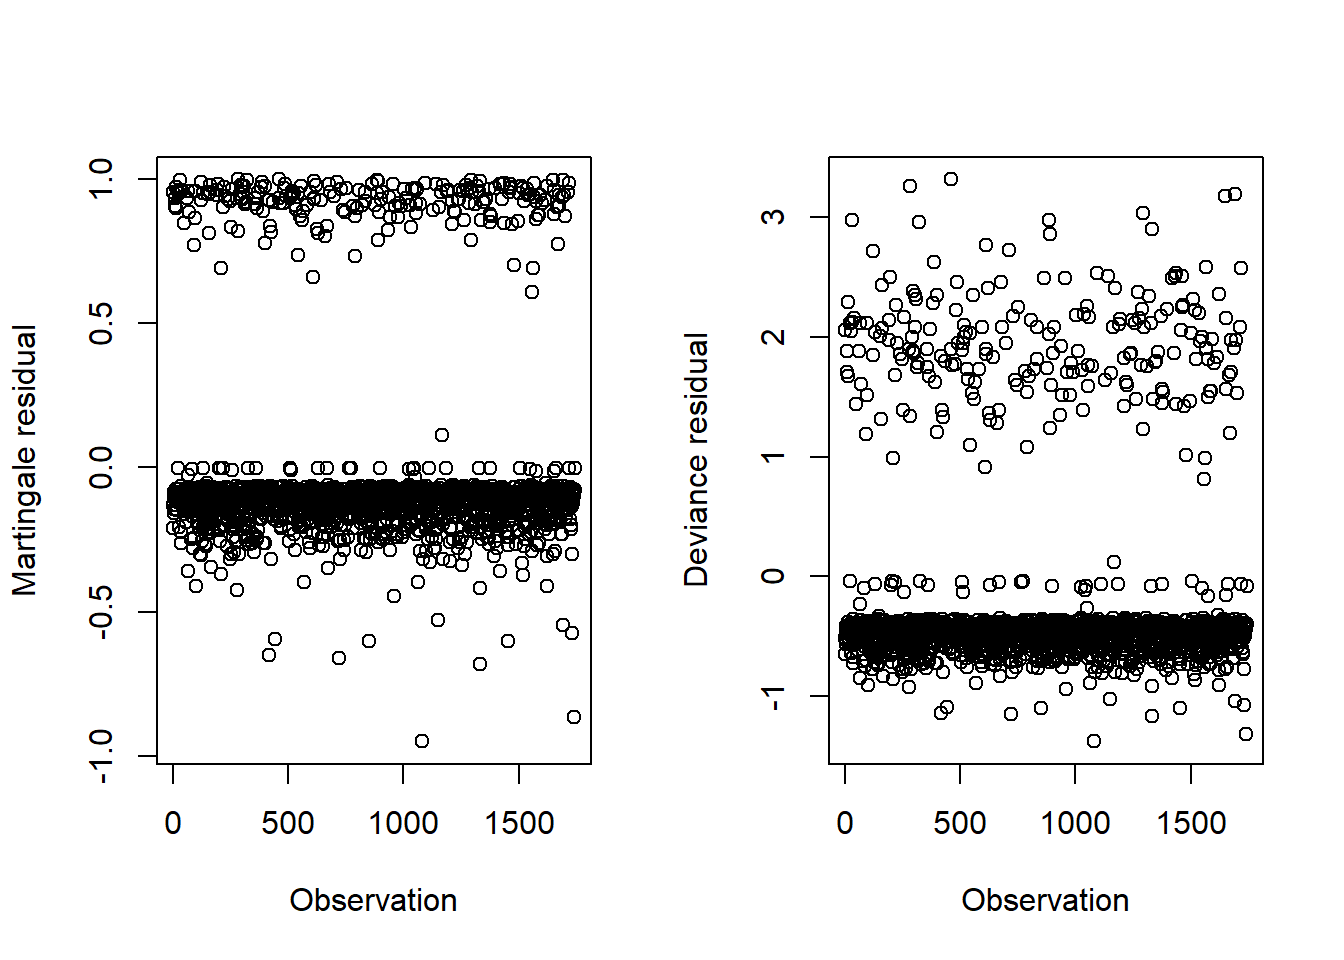 Martingale and deviance residuals from a Cox regression